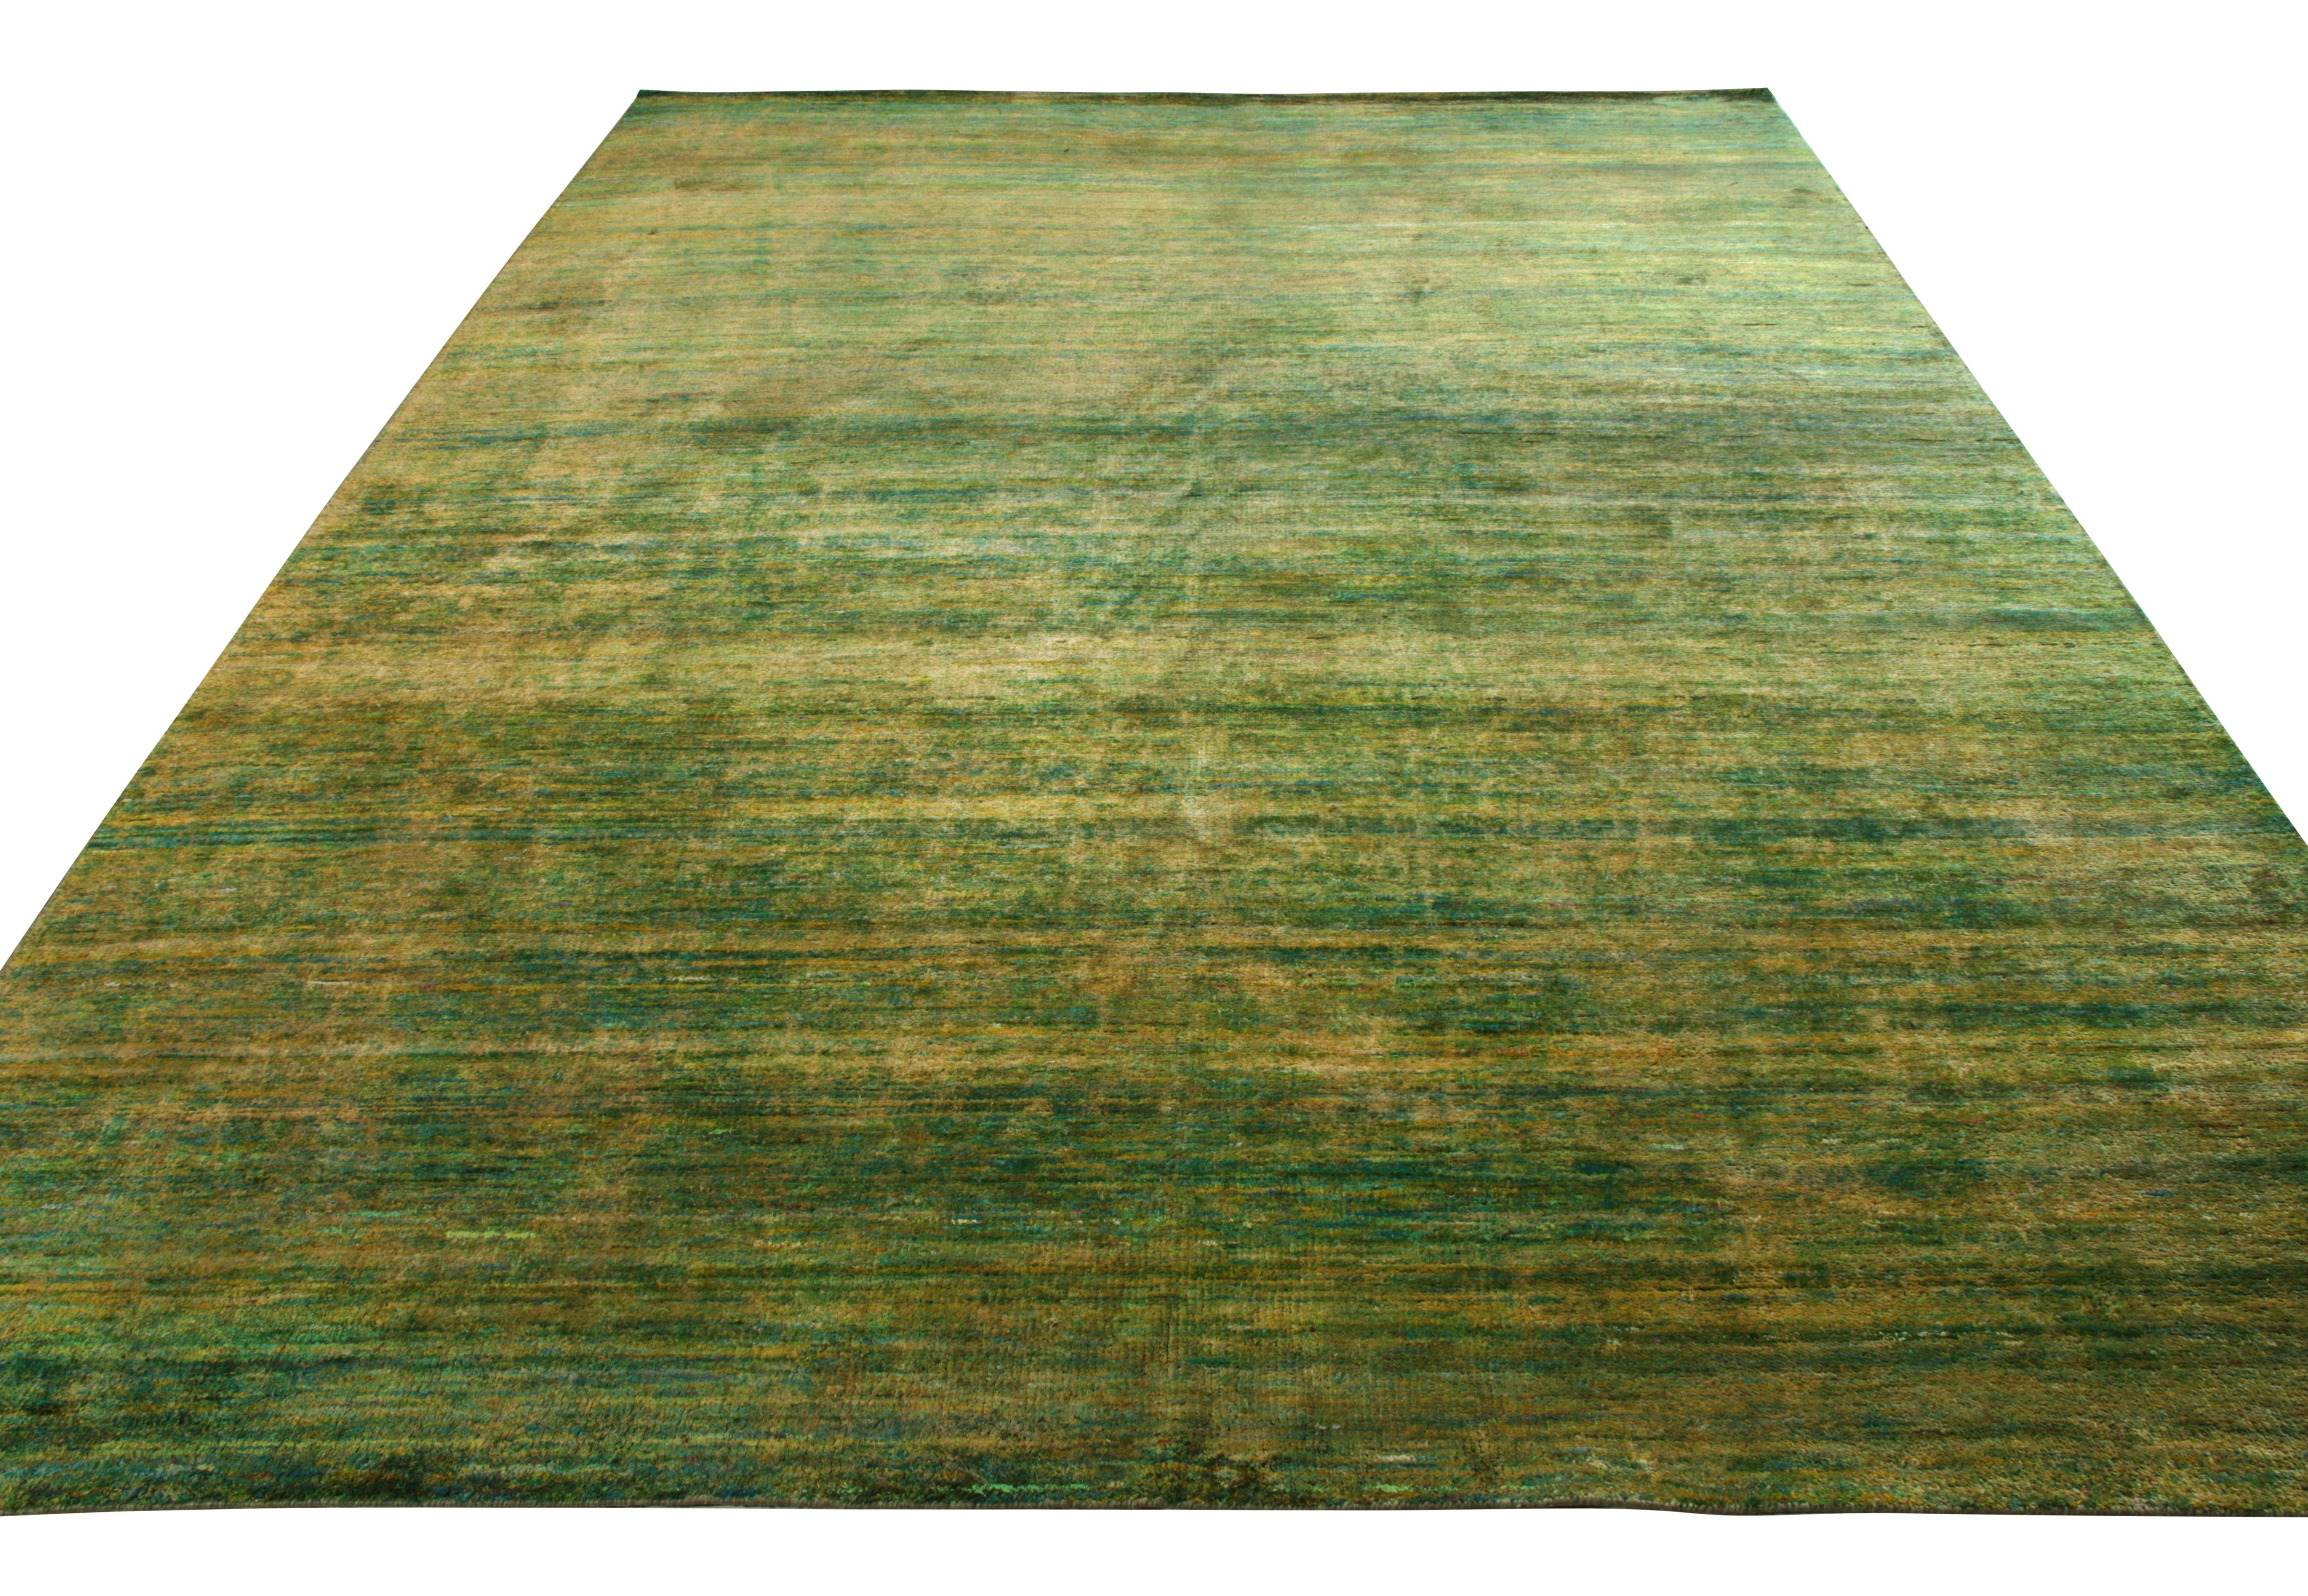 A tasteful hand-knotted silk rug extracting the beauty of primary colours from Rug & Kilim’s exclusive Texture of Color collection. Occupying a 9x12 scale, the rug enjoys a playful tease of green and yellow tones superimposing each other for a